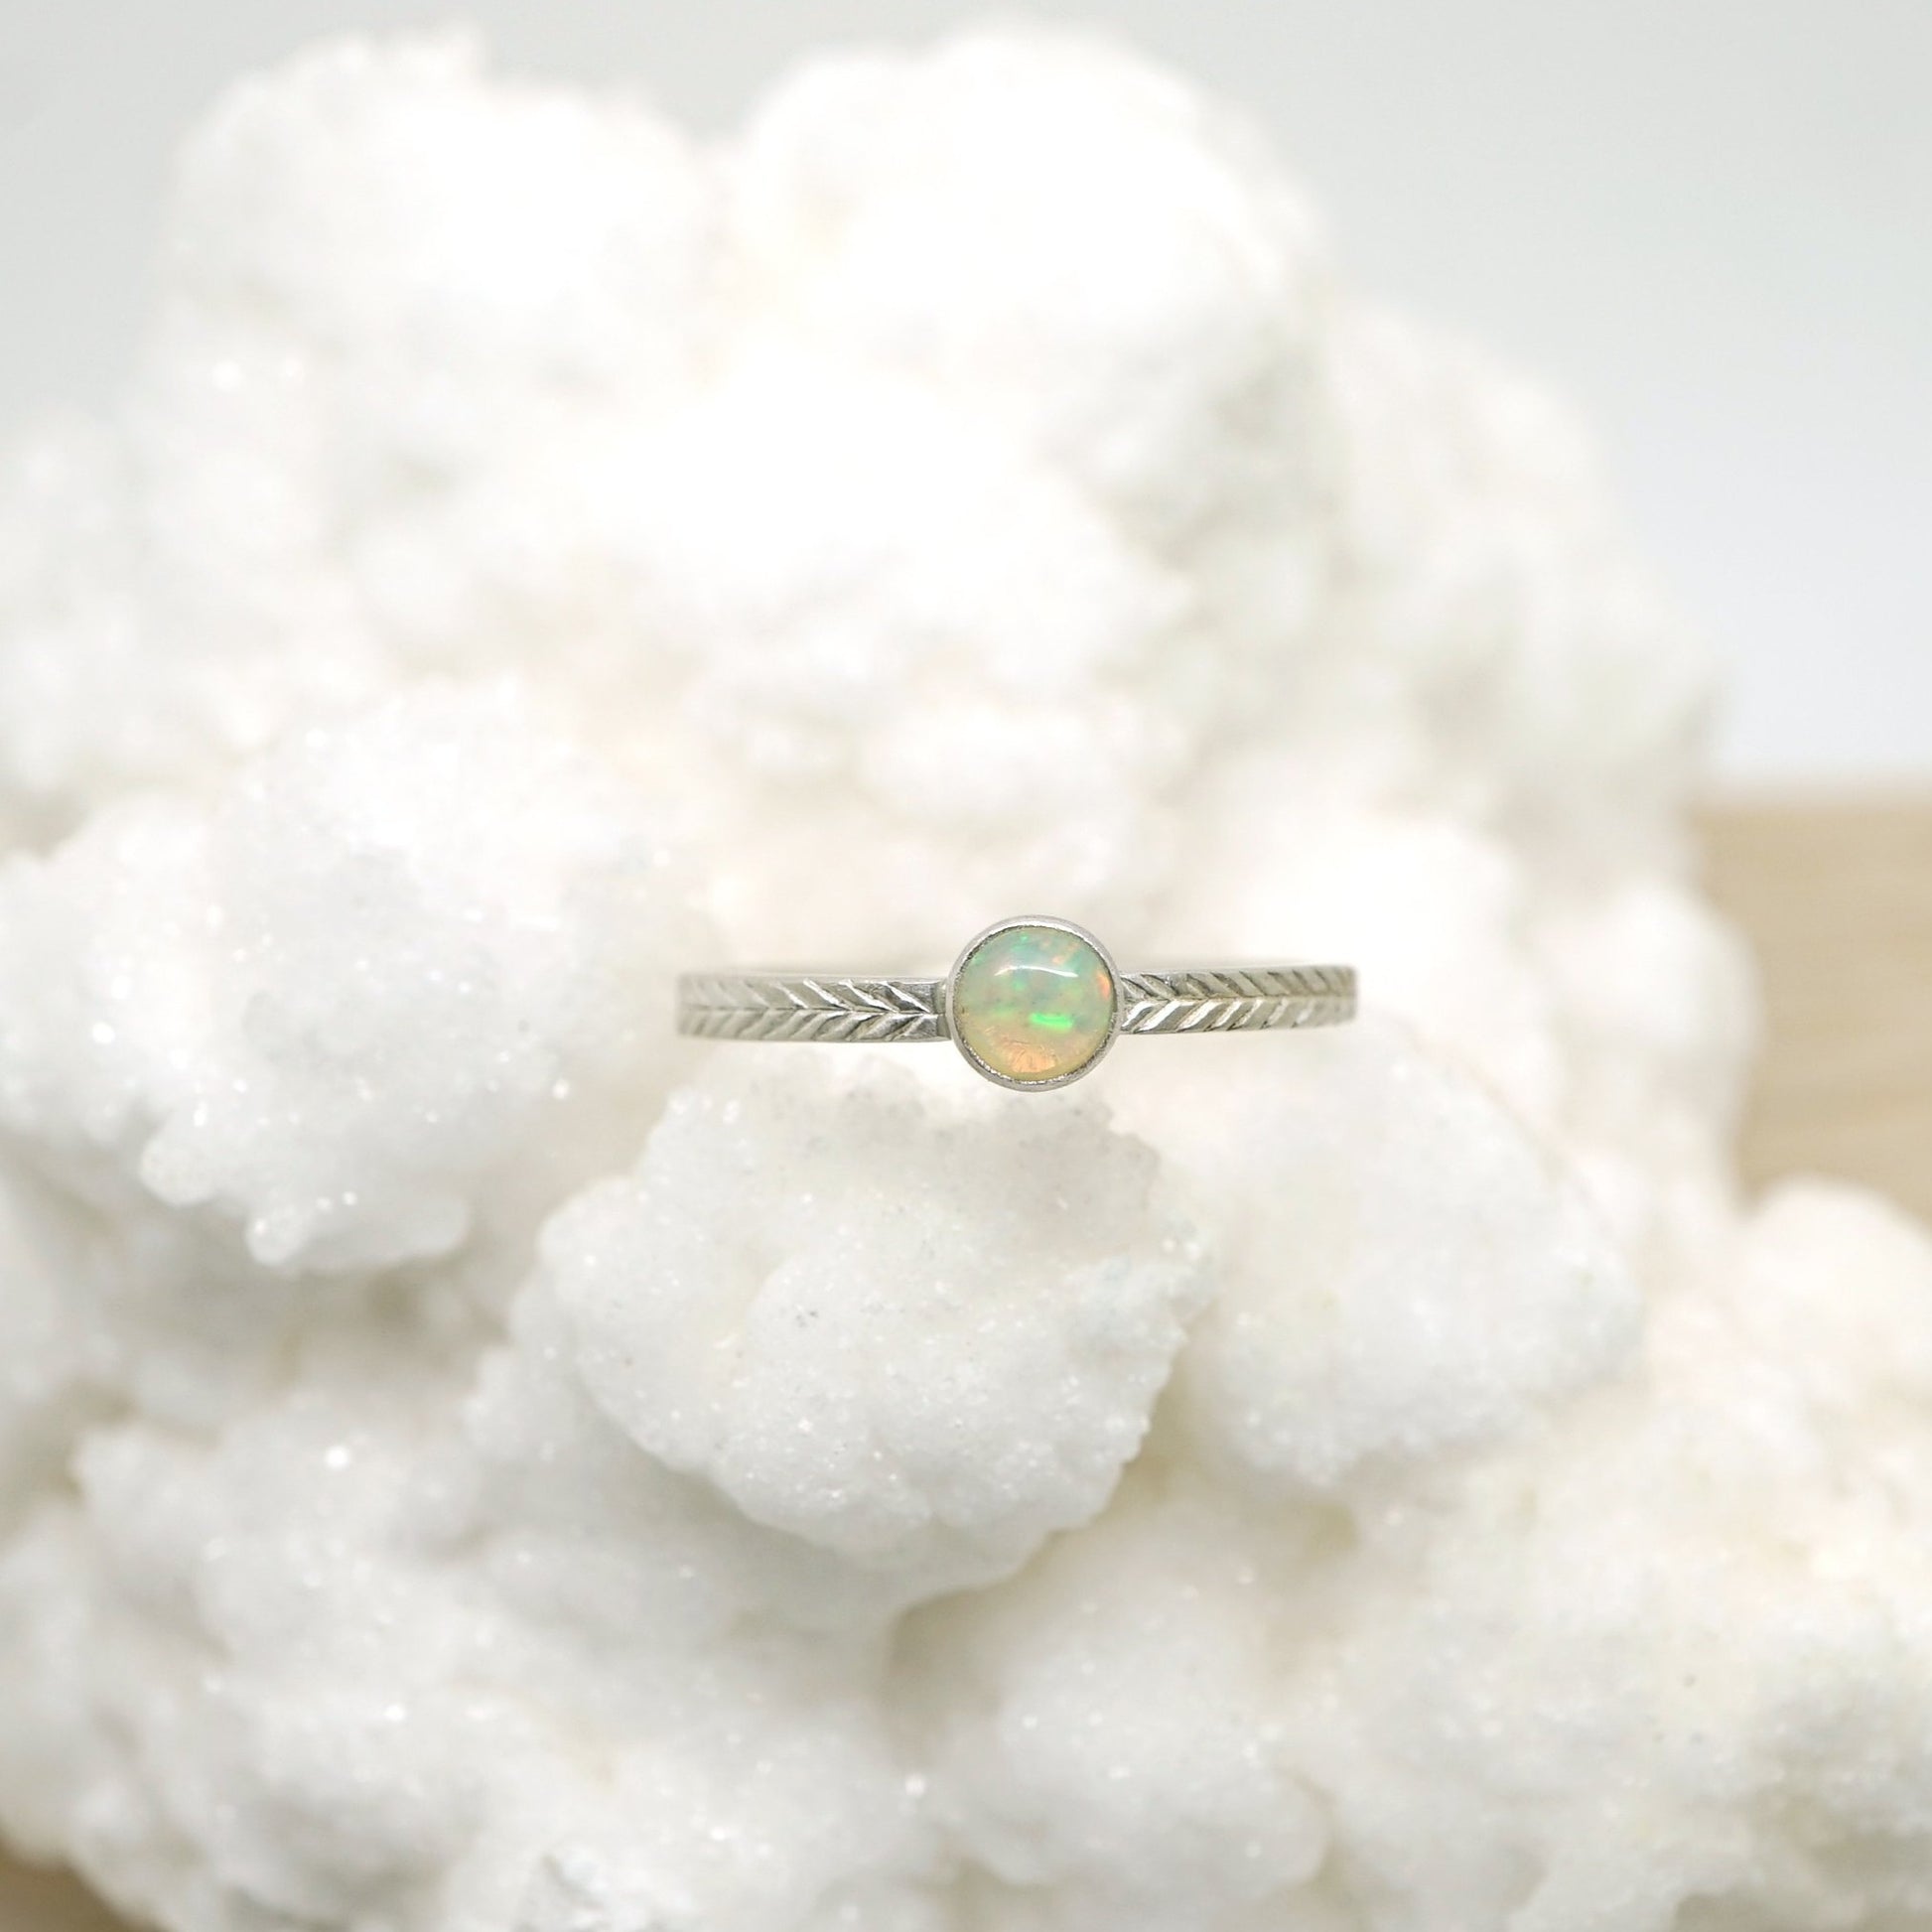 Opal ring with hand-carved feather textures